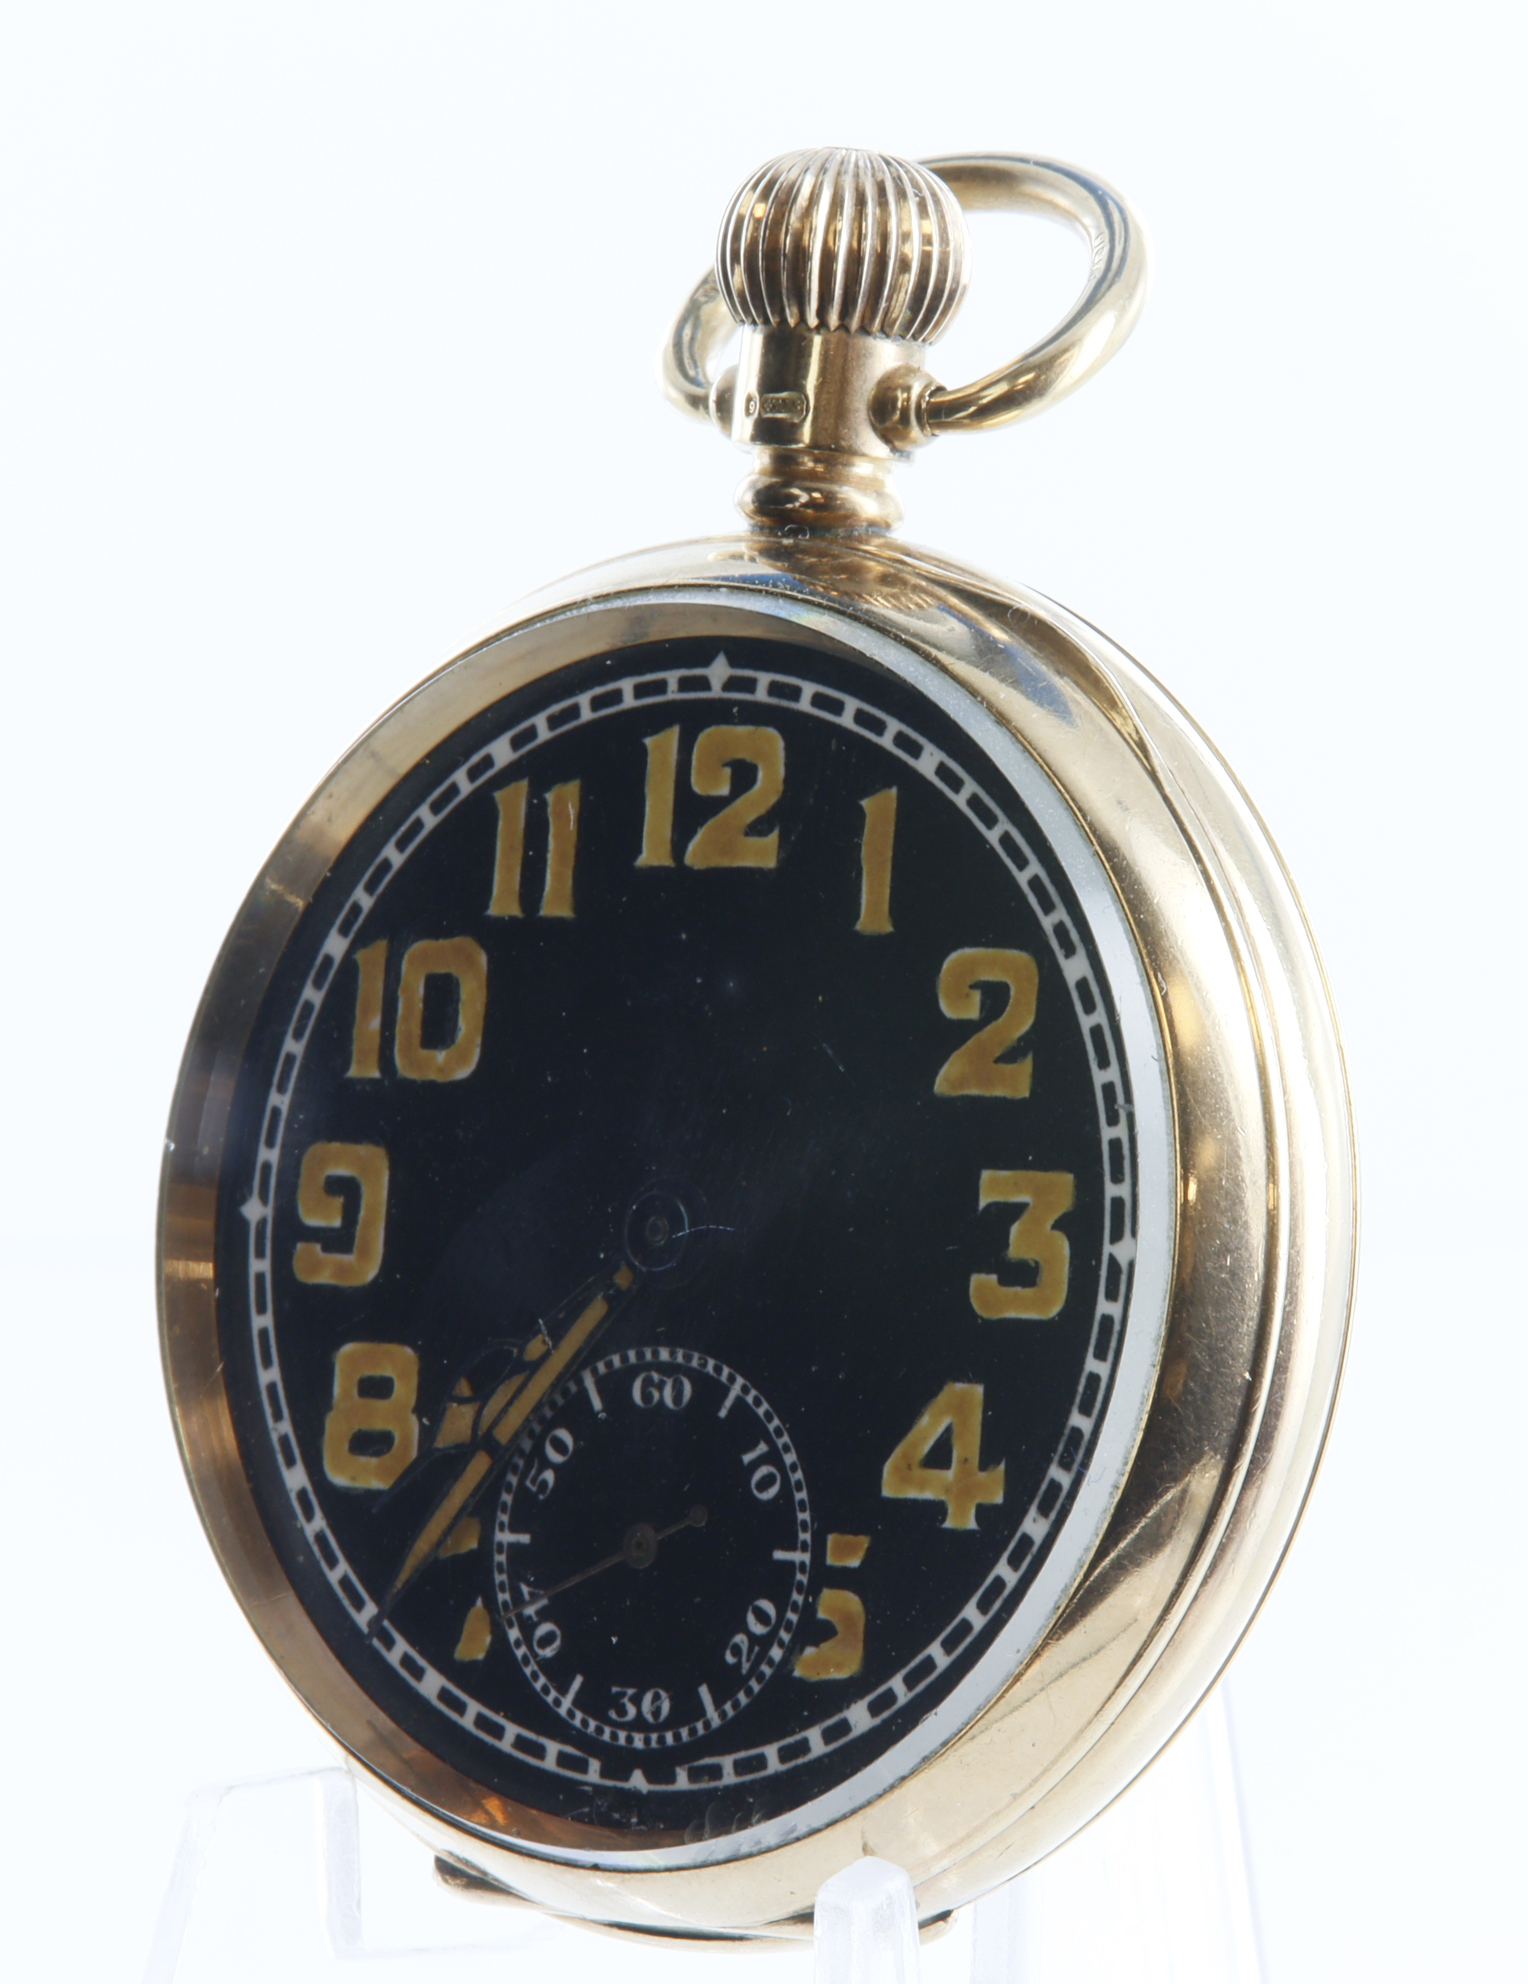 Gents 9ct cased open face stem-wind pocket watch, hallmarked Birmingham 1919. The black dial with